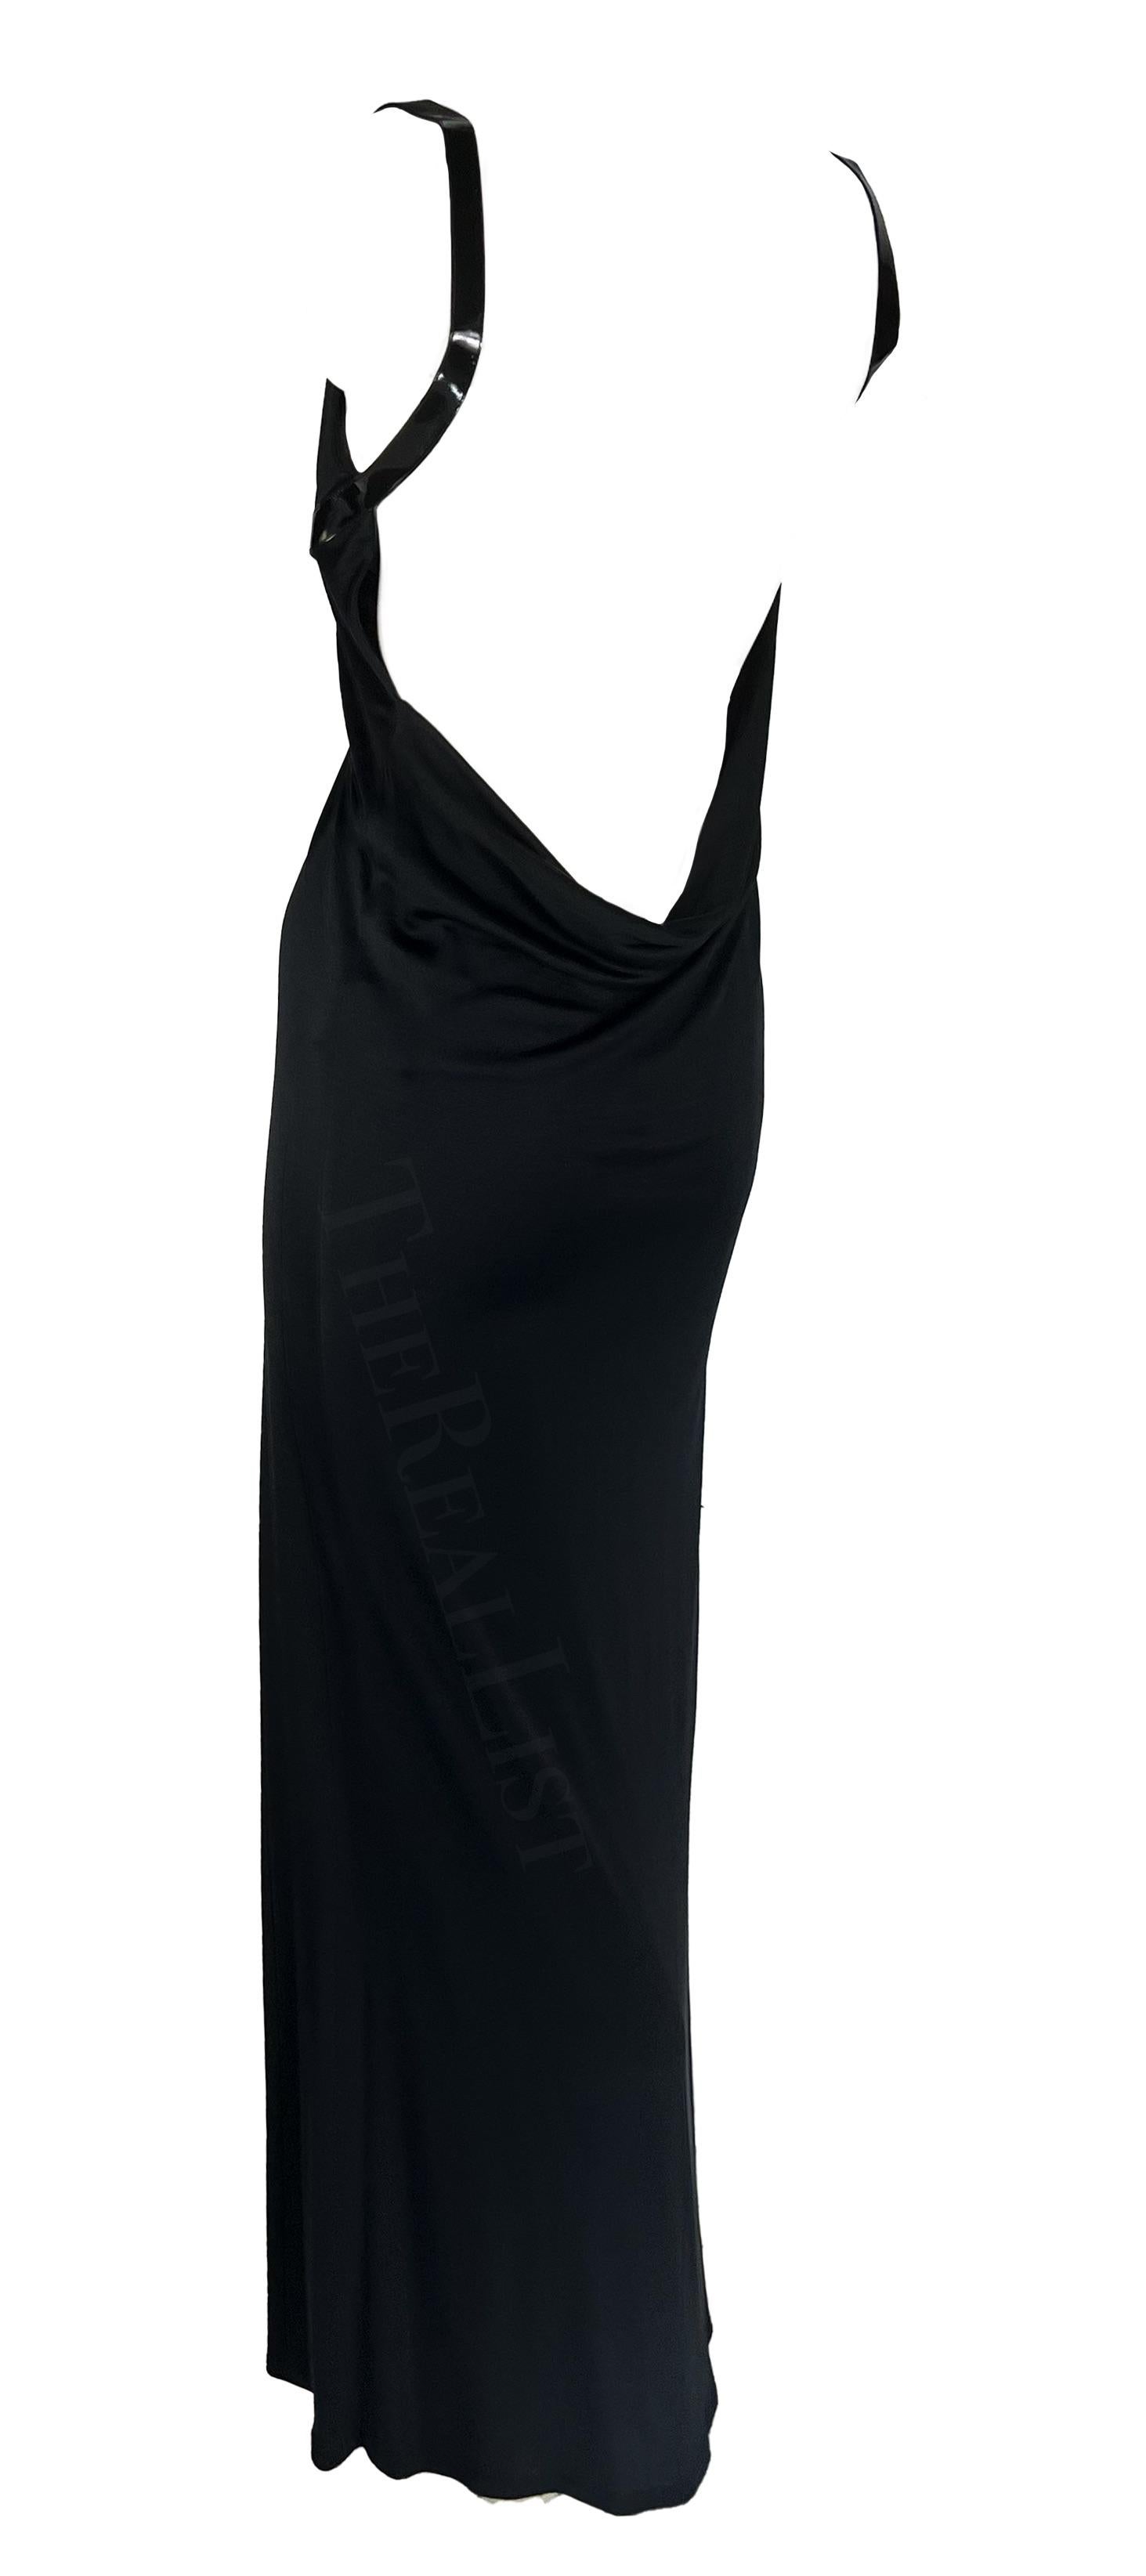 Presenting a gorgeous black silk backless gown designed by Tom Ford for Gucci in 1999. The patent leather straps elegantly wrap from the scoop neckline around the shoulders and back under the bust forming a harness-like detail. The strap design